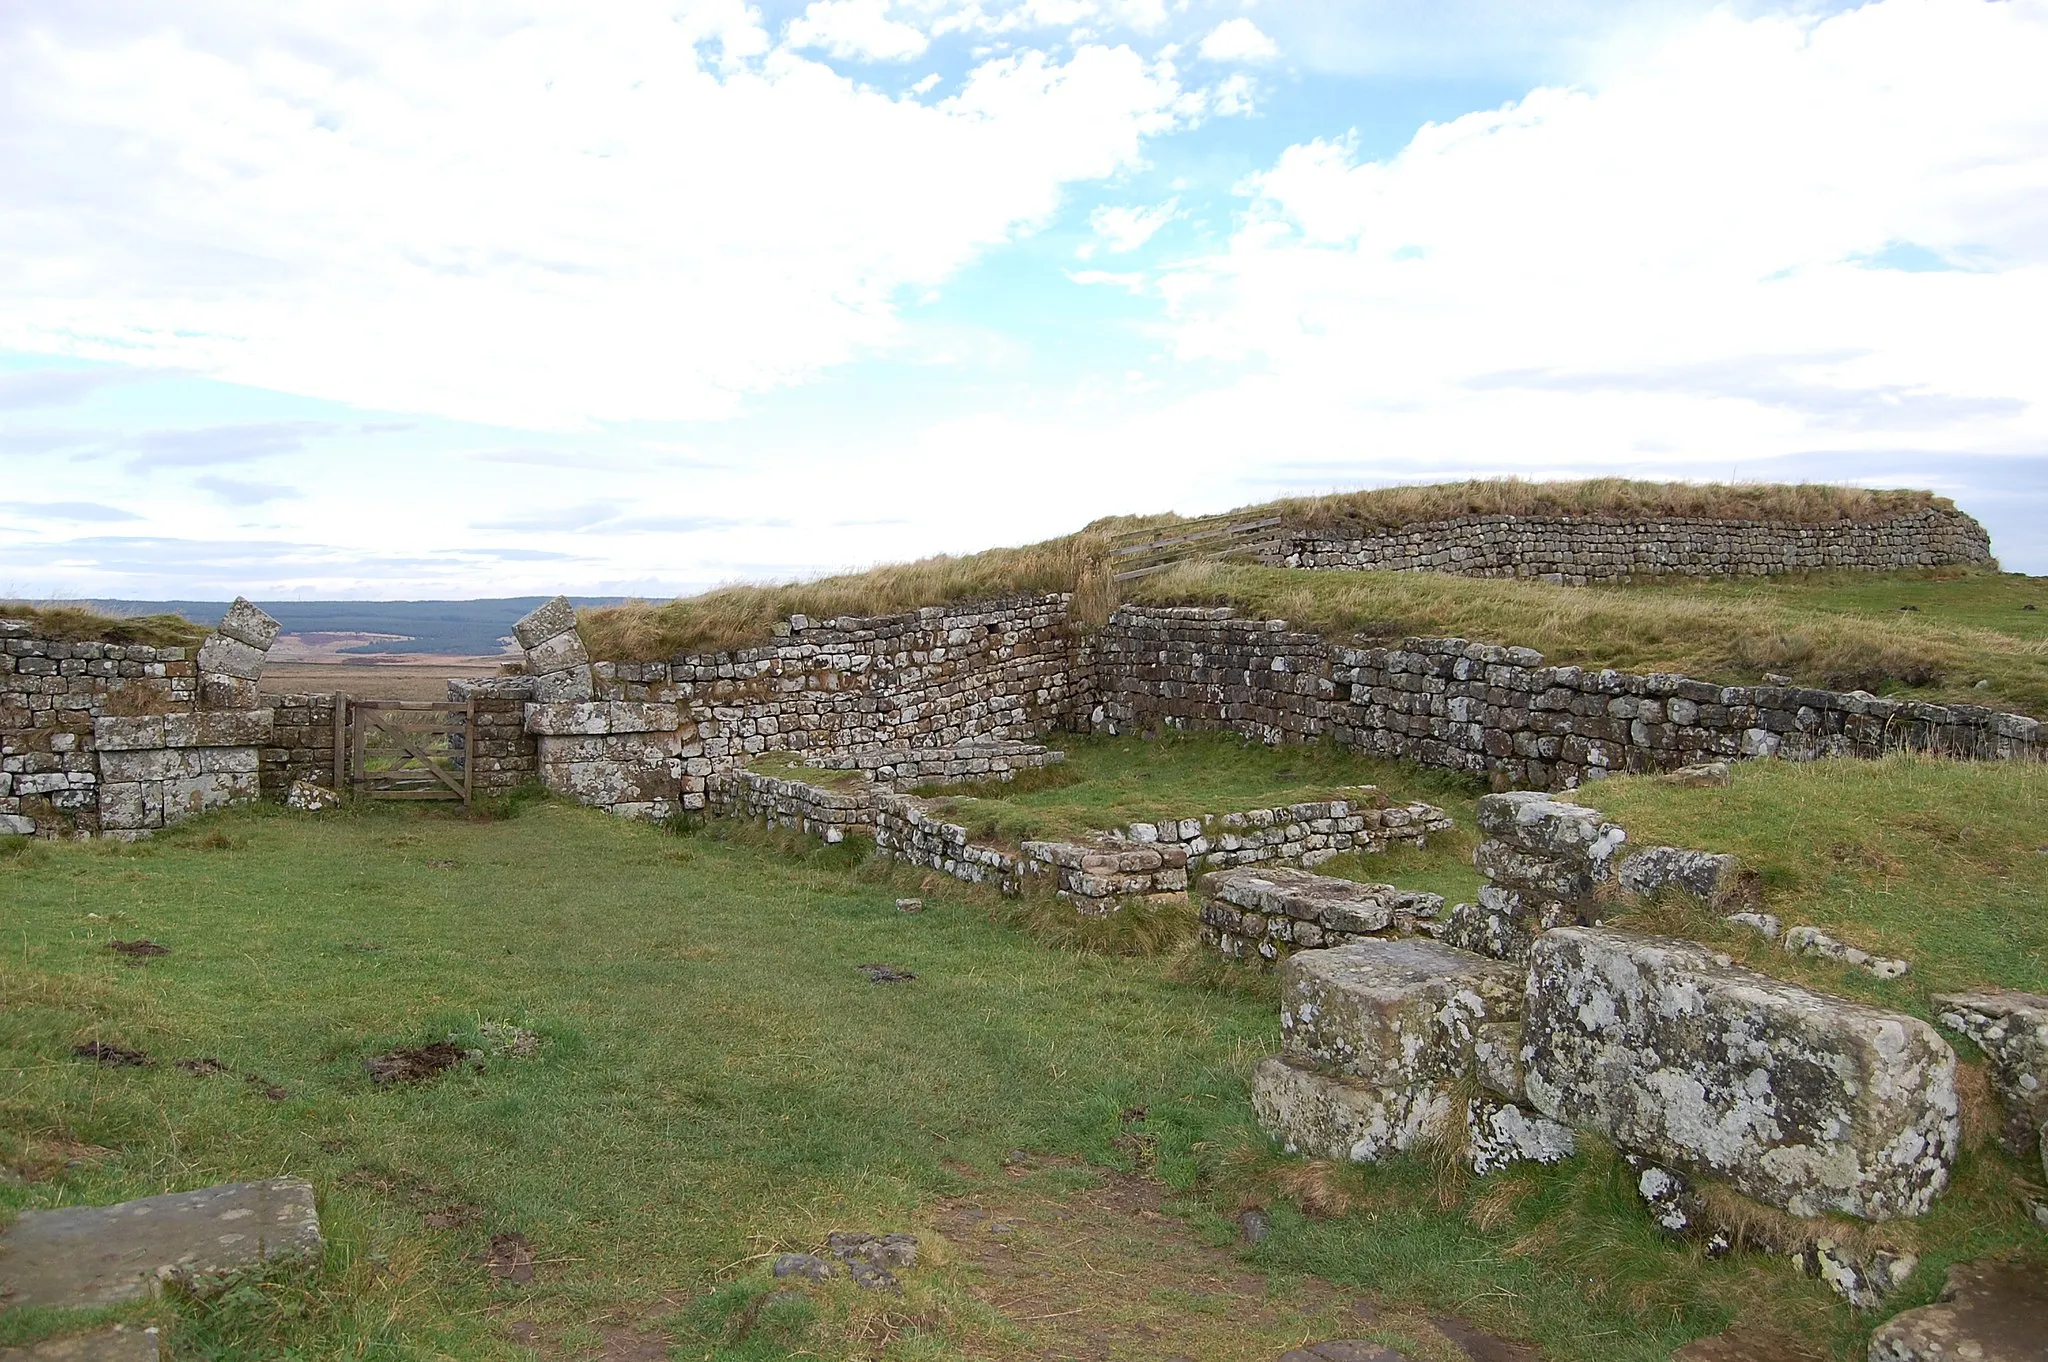 Photo showing: Ruins of a gatehouse in Hadrian's Wall about 1 mile west of the Roman Fort near Housesteads.